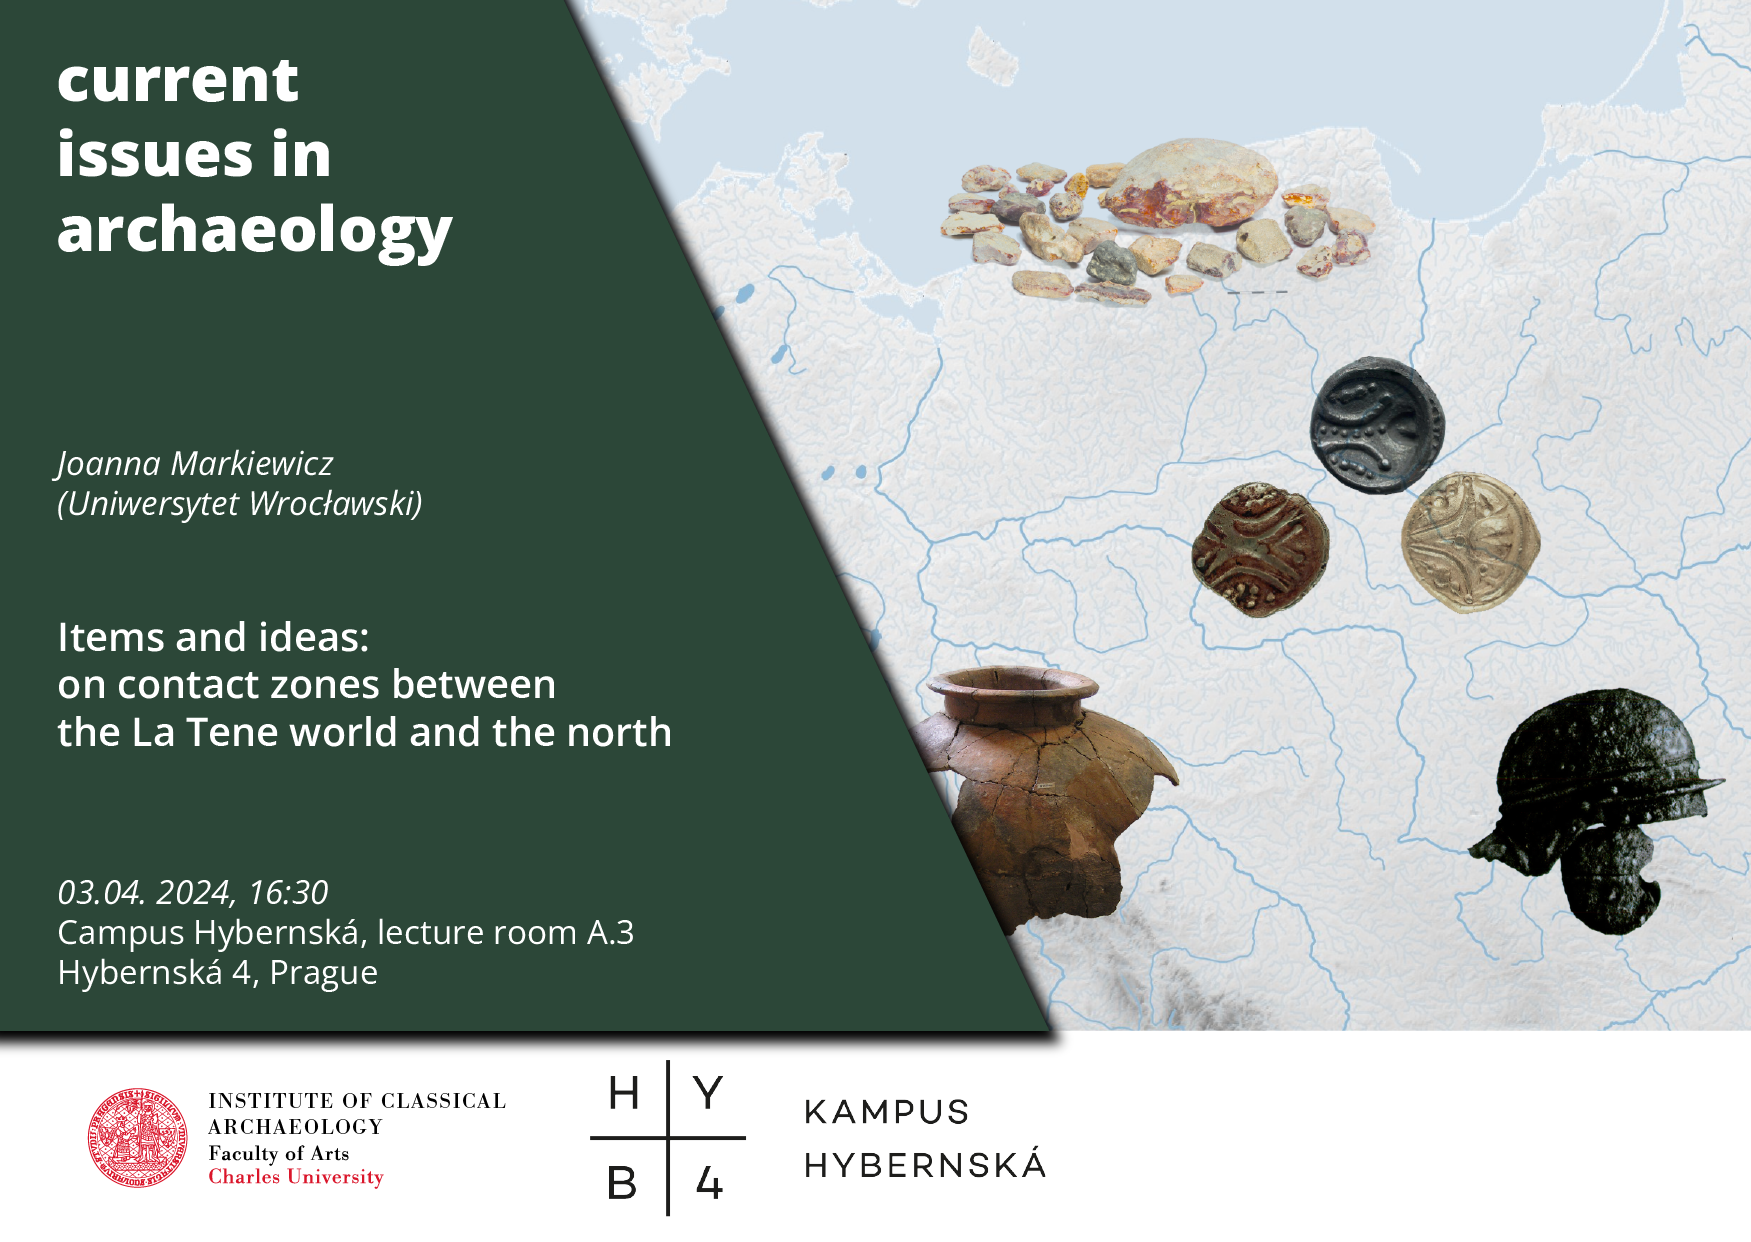 J. Markiewicz (Uniwersytet Wrocławski): "Items and ideas: on contact zones between the La Tène world and the north" @ Kampus Hybernská, lecture room A.3